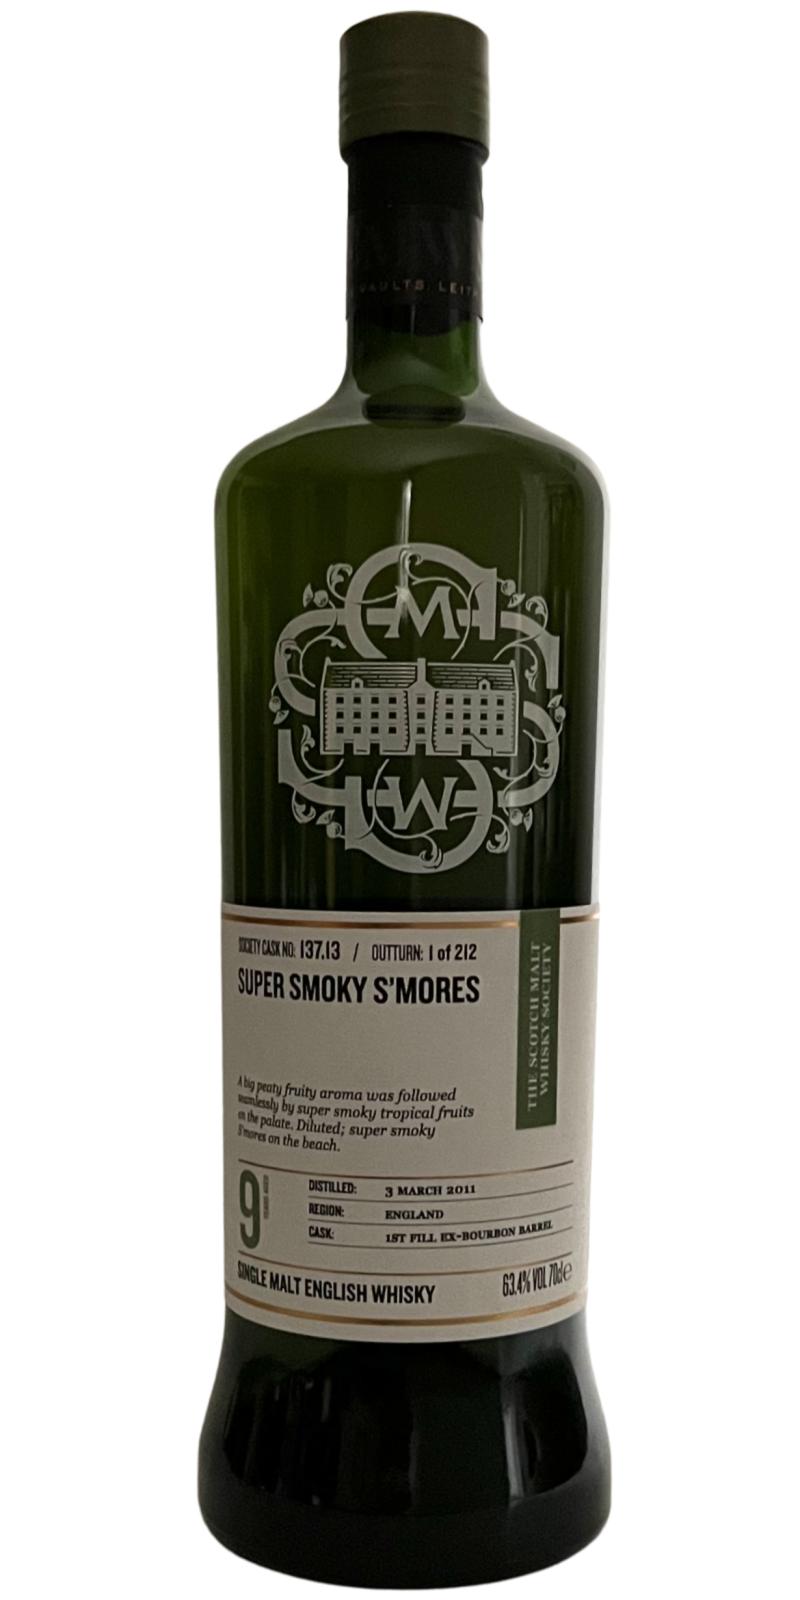 The English Whisky 2011 SMWS 137.13